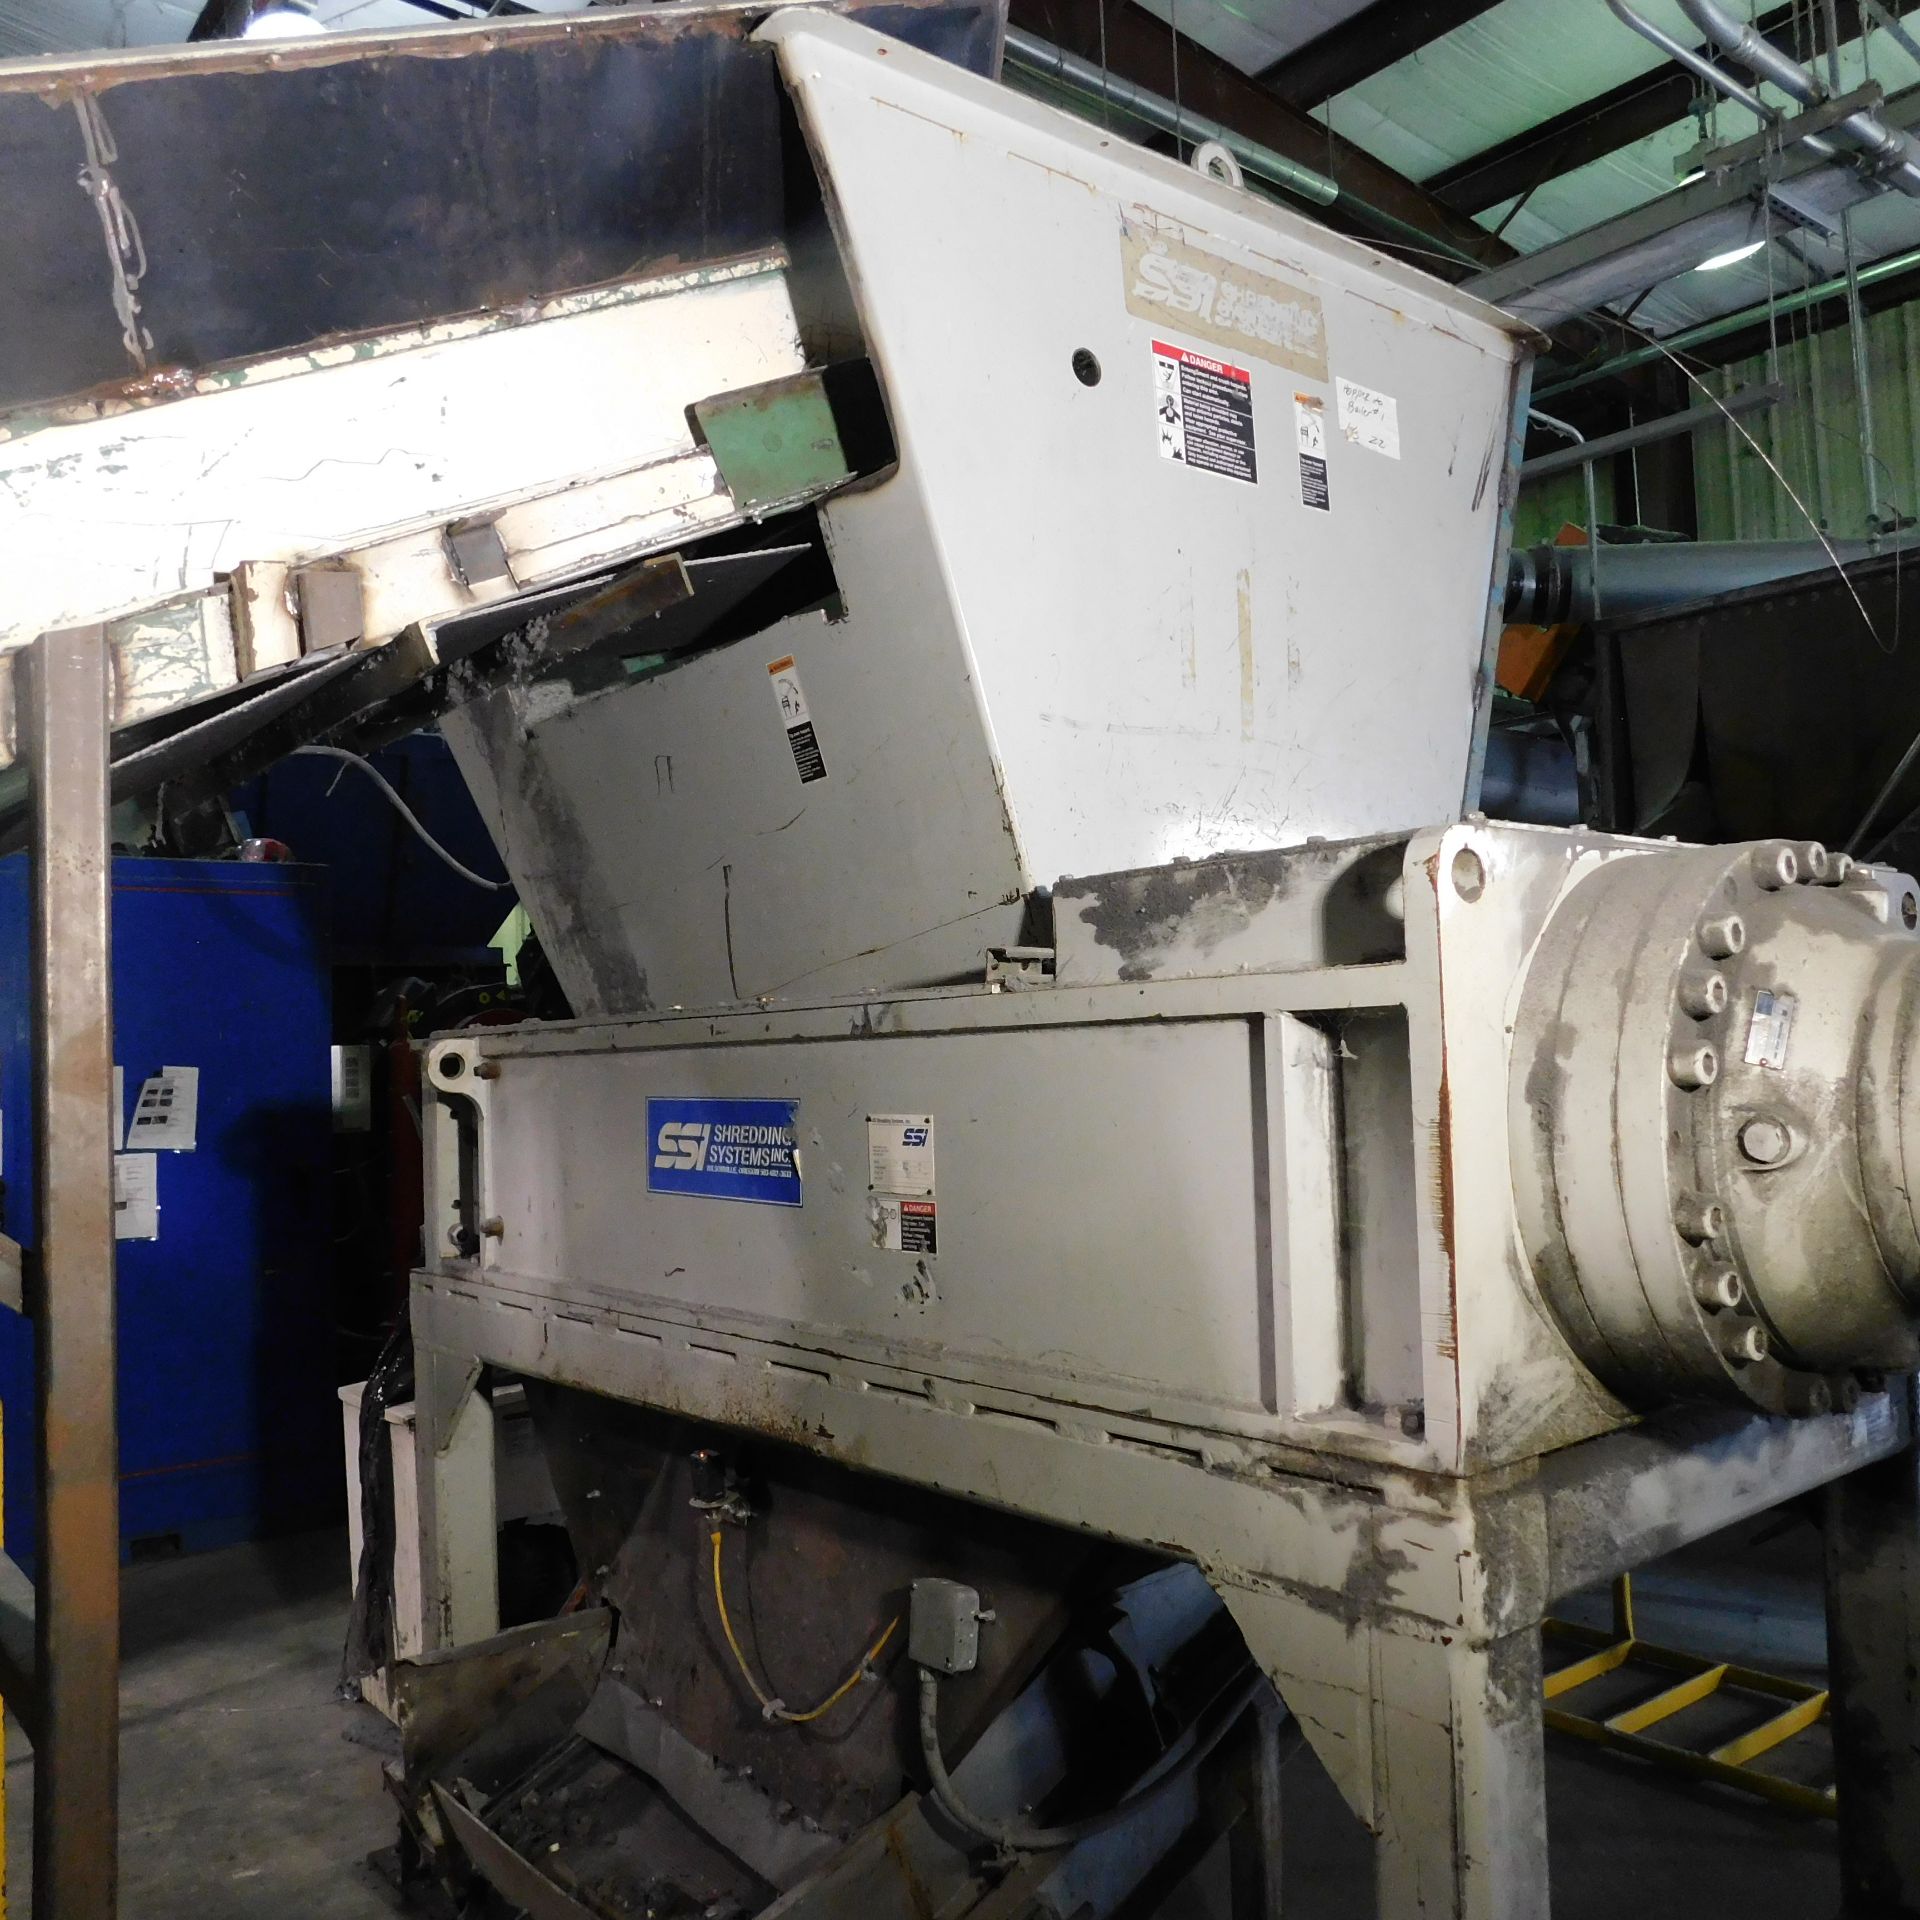 SSI Model M85-H Shredder, s/n 50887-M85H, New 1996, 100 HP, 60", 35" X 52" Curring Chamber, 59" X - Image 4 of 8